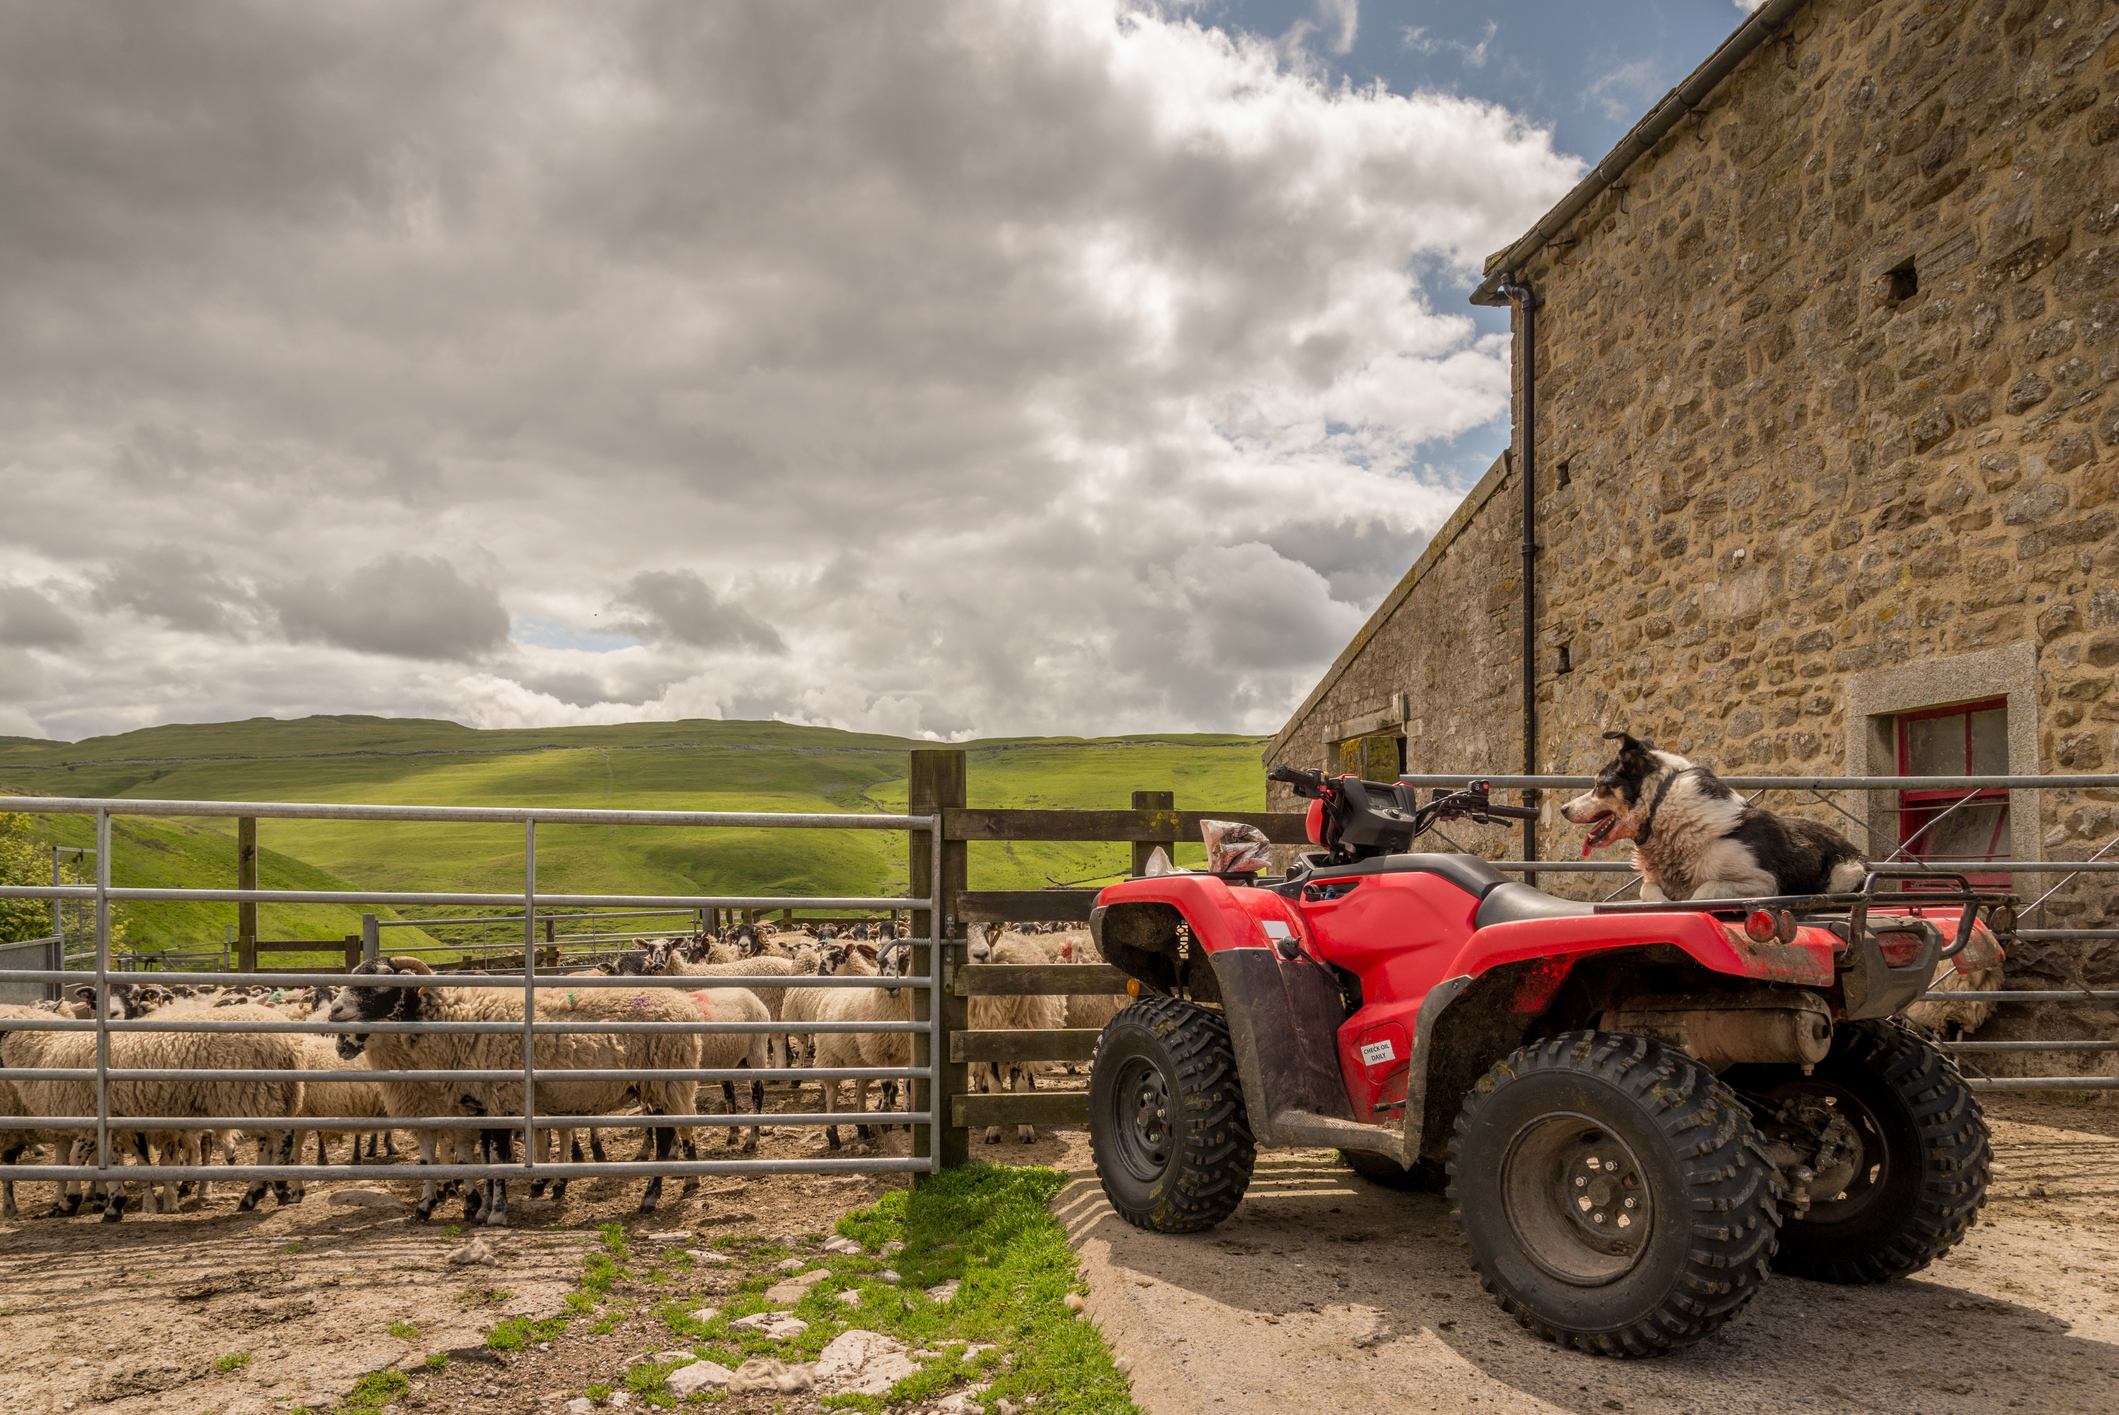 Quad bikes are a target for thieves.